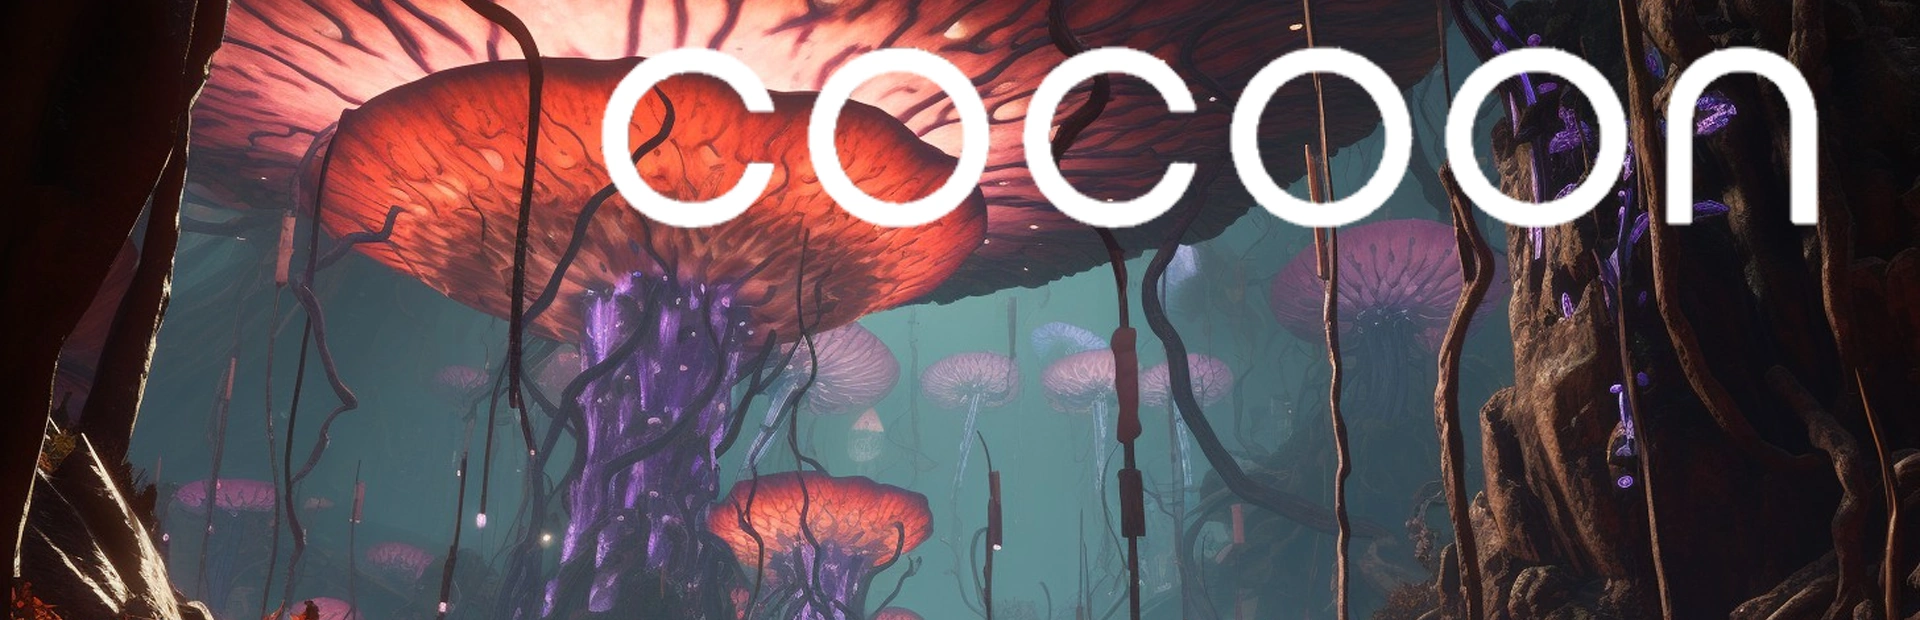 COCOON.banner2